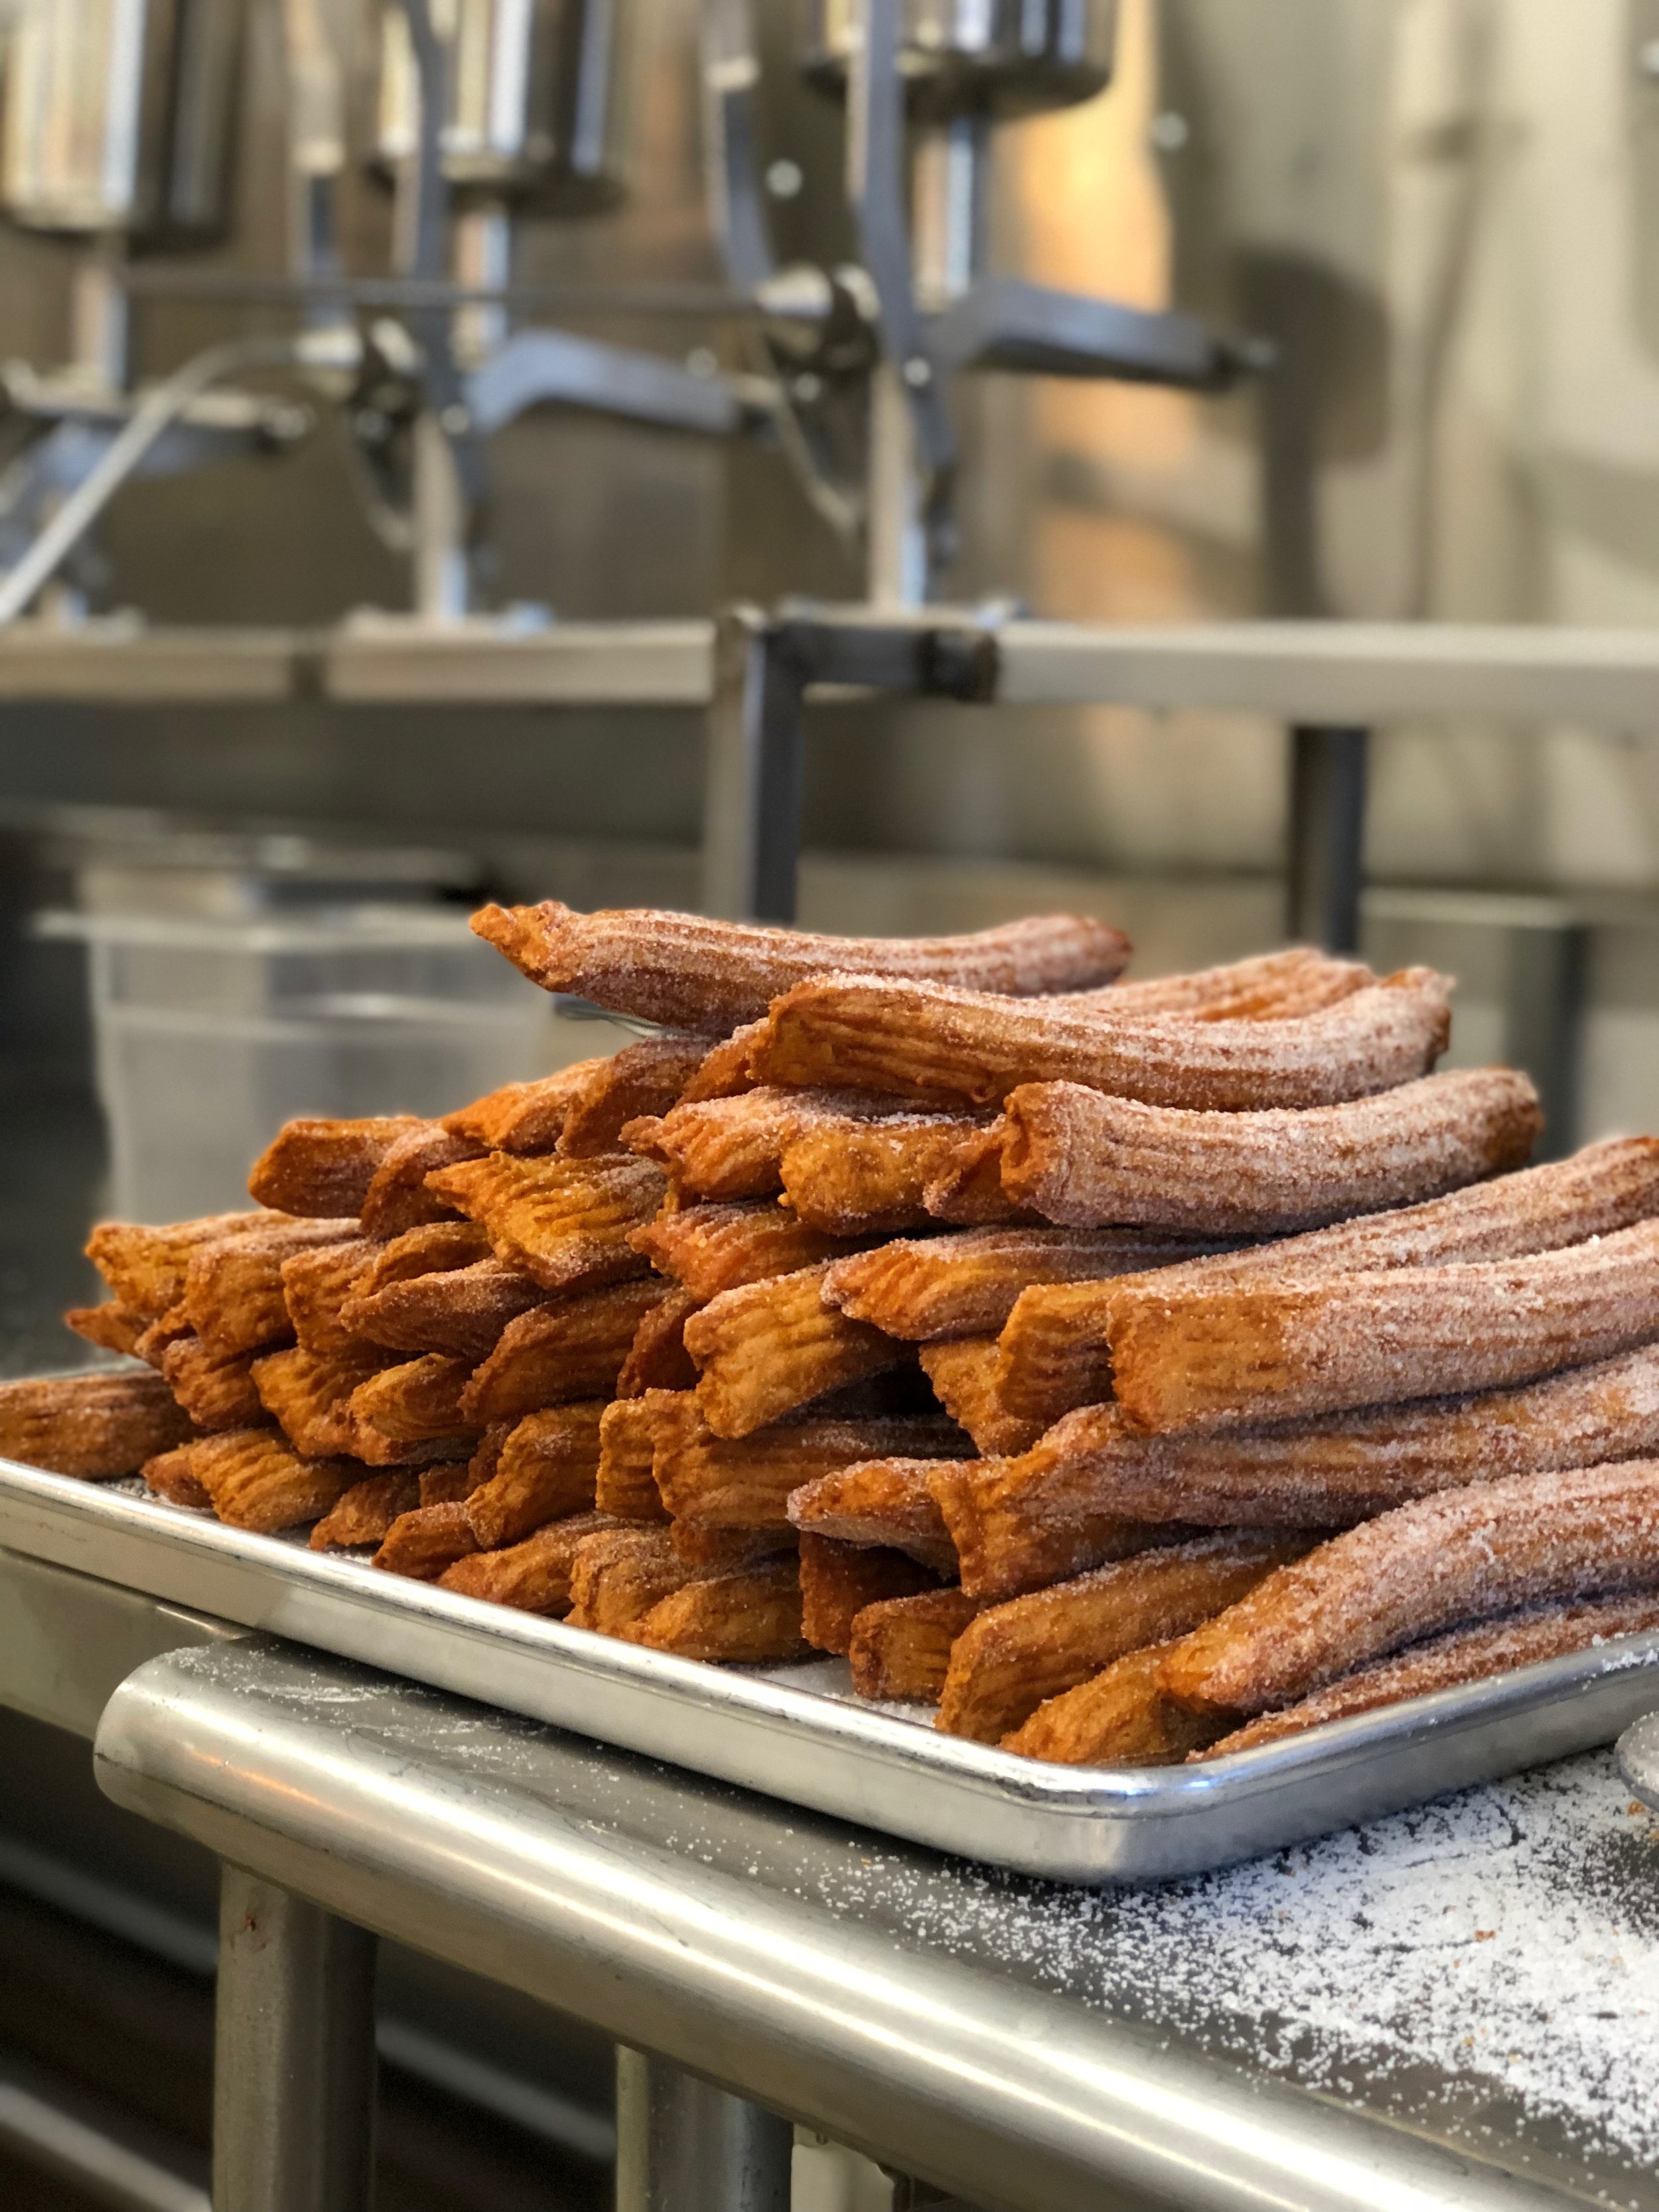 Our churros are vegan friendly.